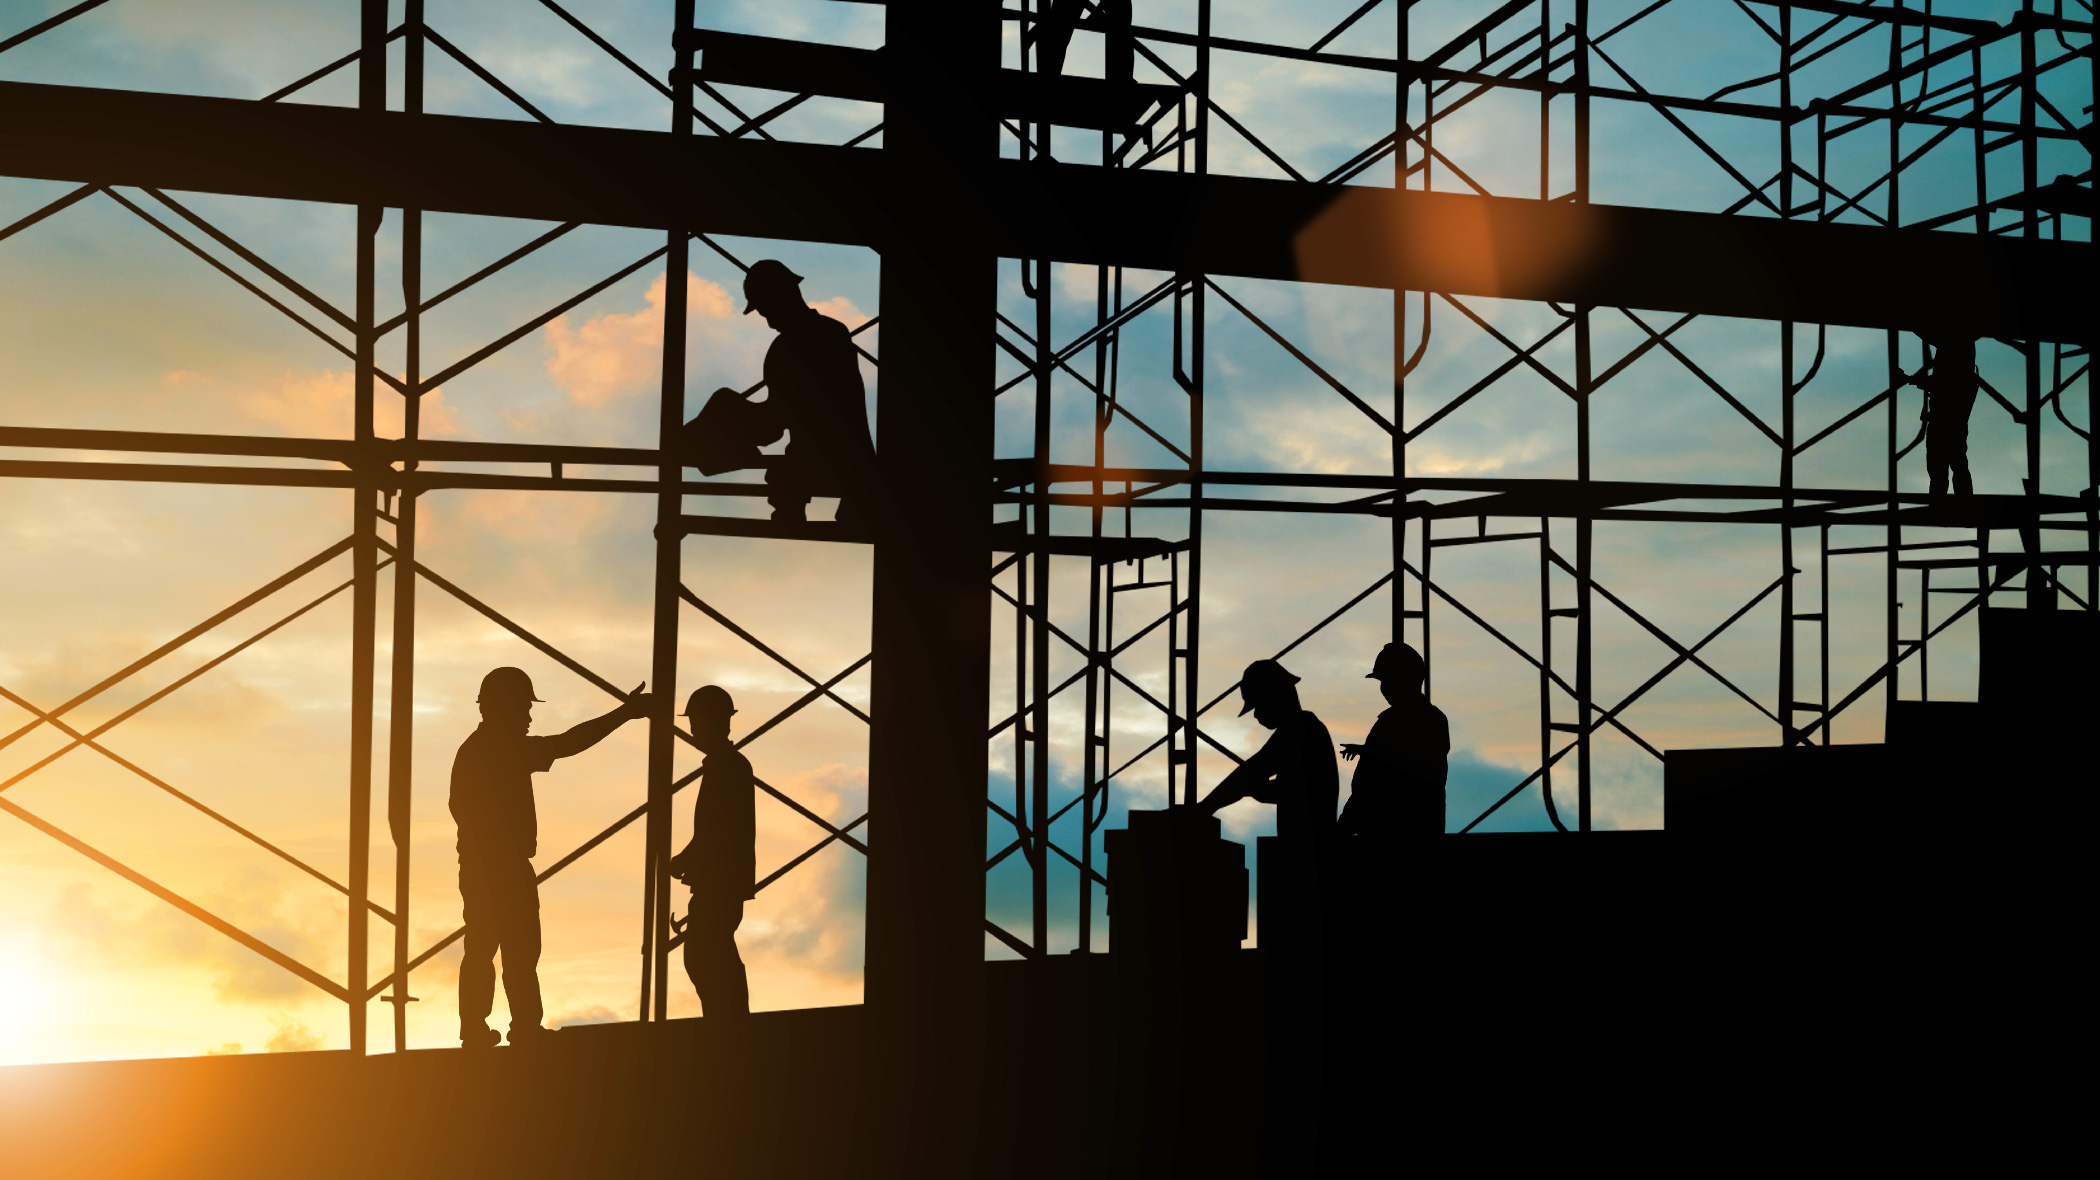 Silhouette engineer standing orders for construction crews to work on